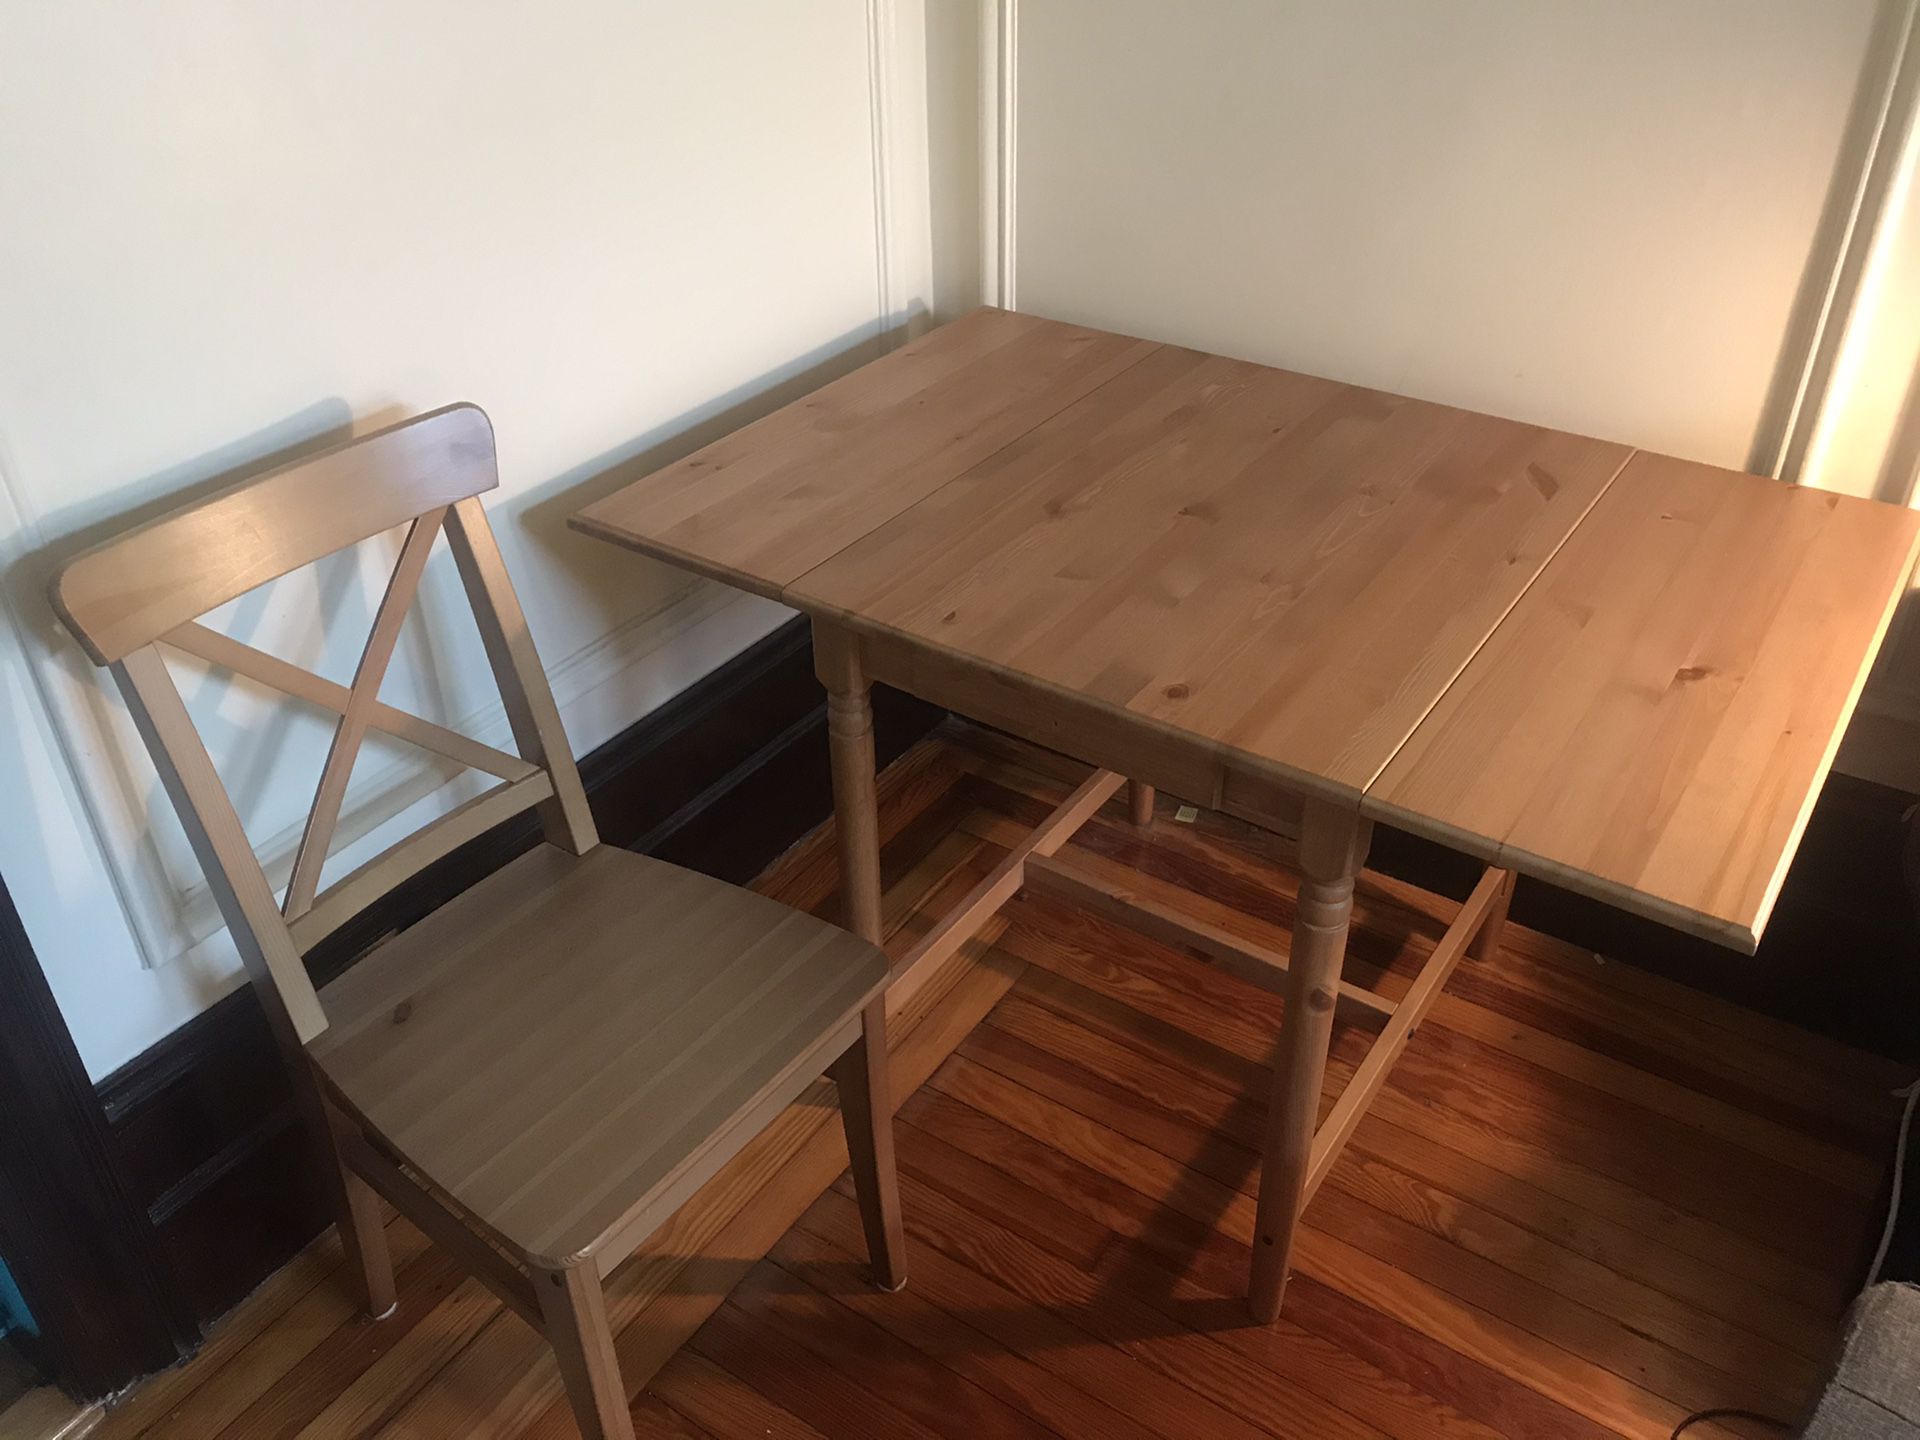 IKEA Table and chairs